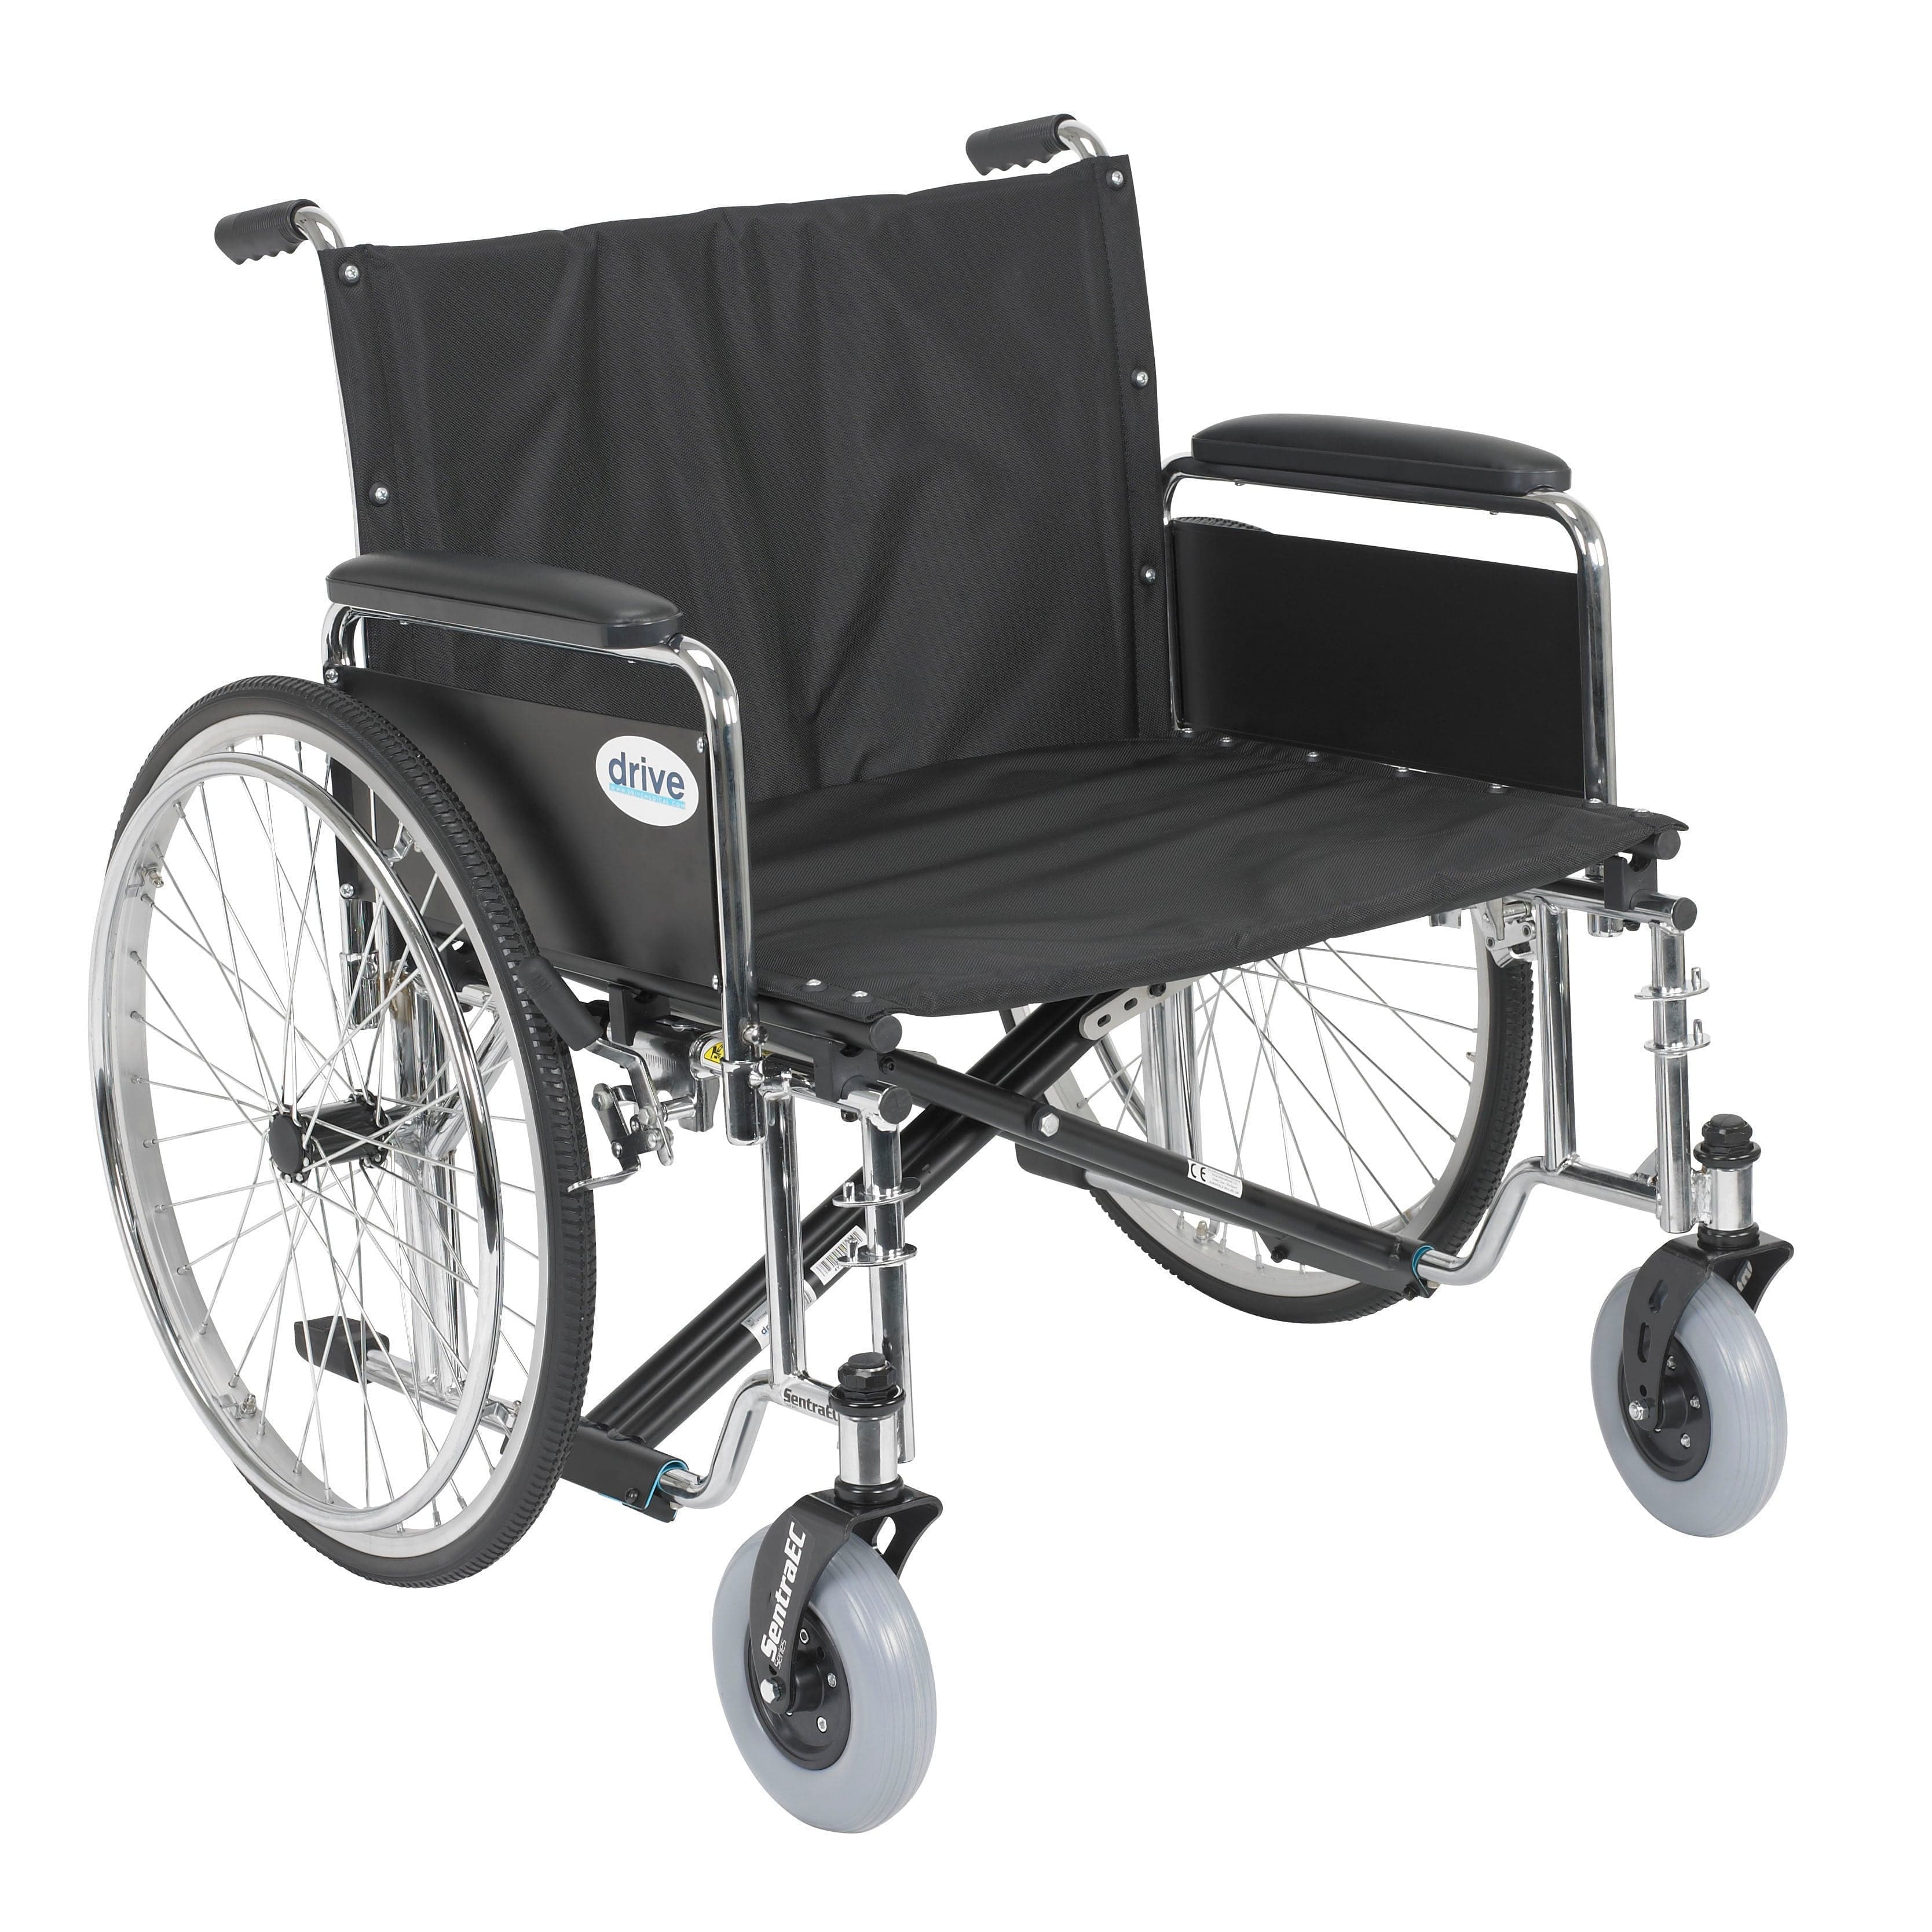 Drive Medical Wheelchairs Detachable Full Arms / 26" Seat Drive Medical Sentra EC Heavy Duty Extra Wide Wheelchair